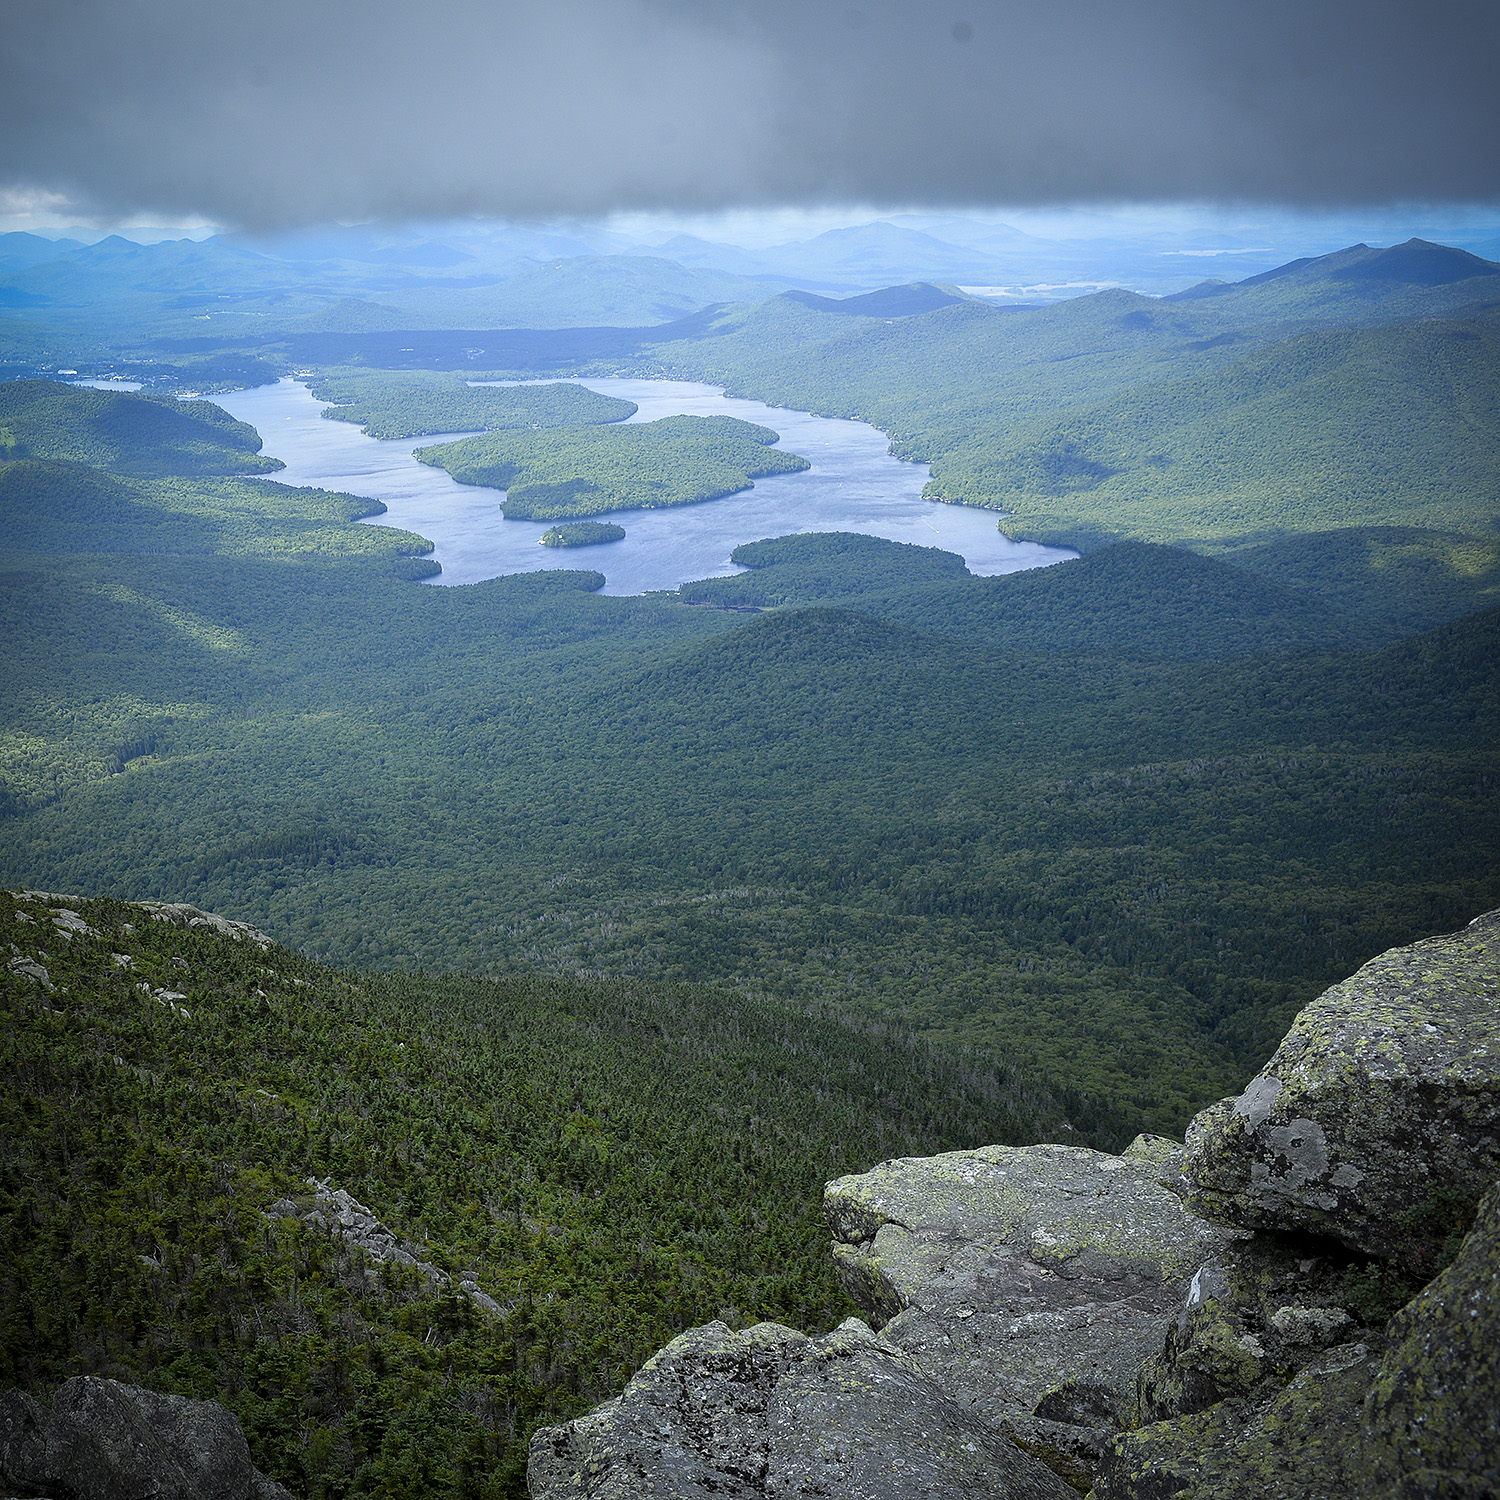 View of Adirondacks from Whiteface mountain